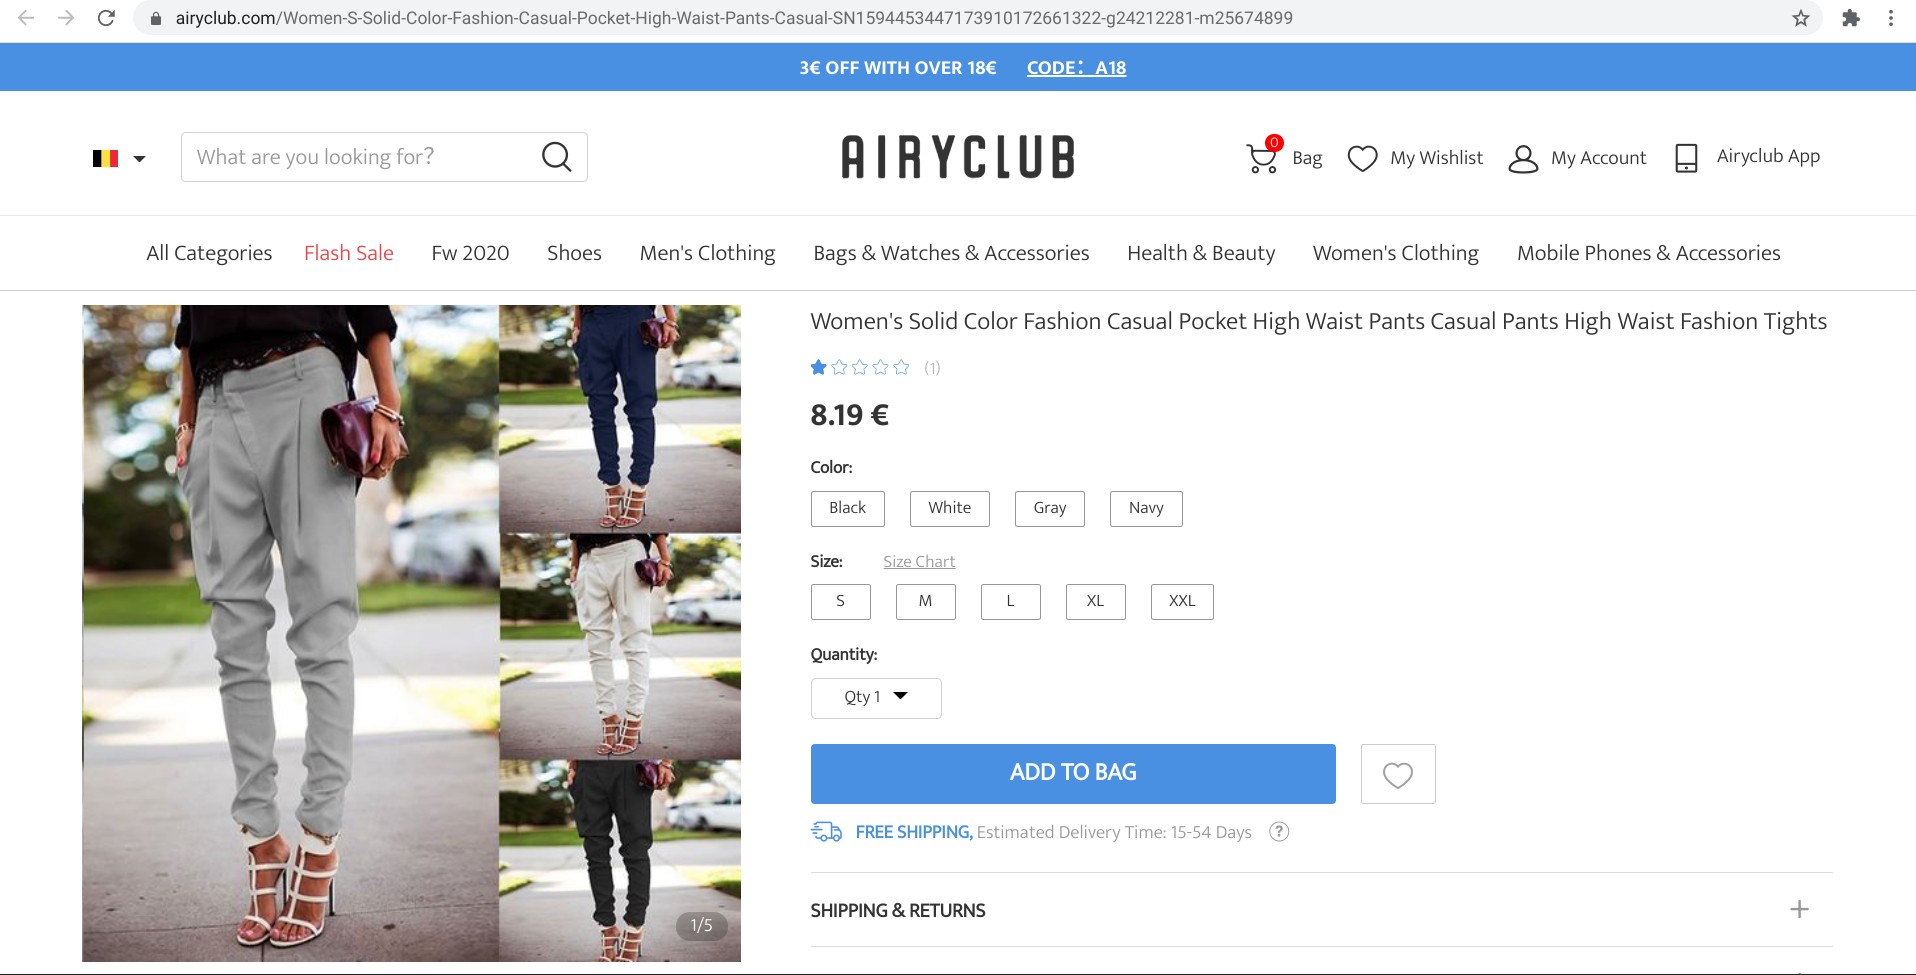 Screenshot of airyclub offer of pants for 8.19 Euro